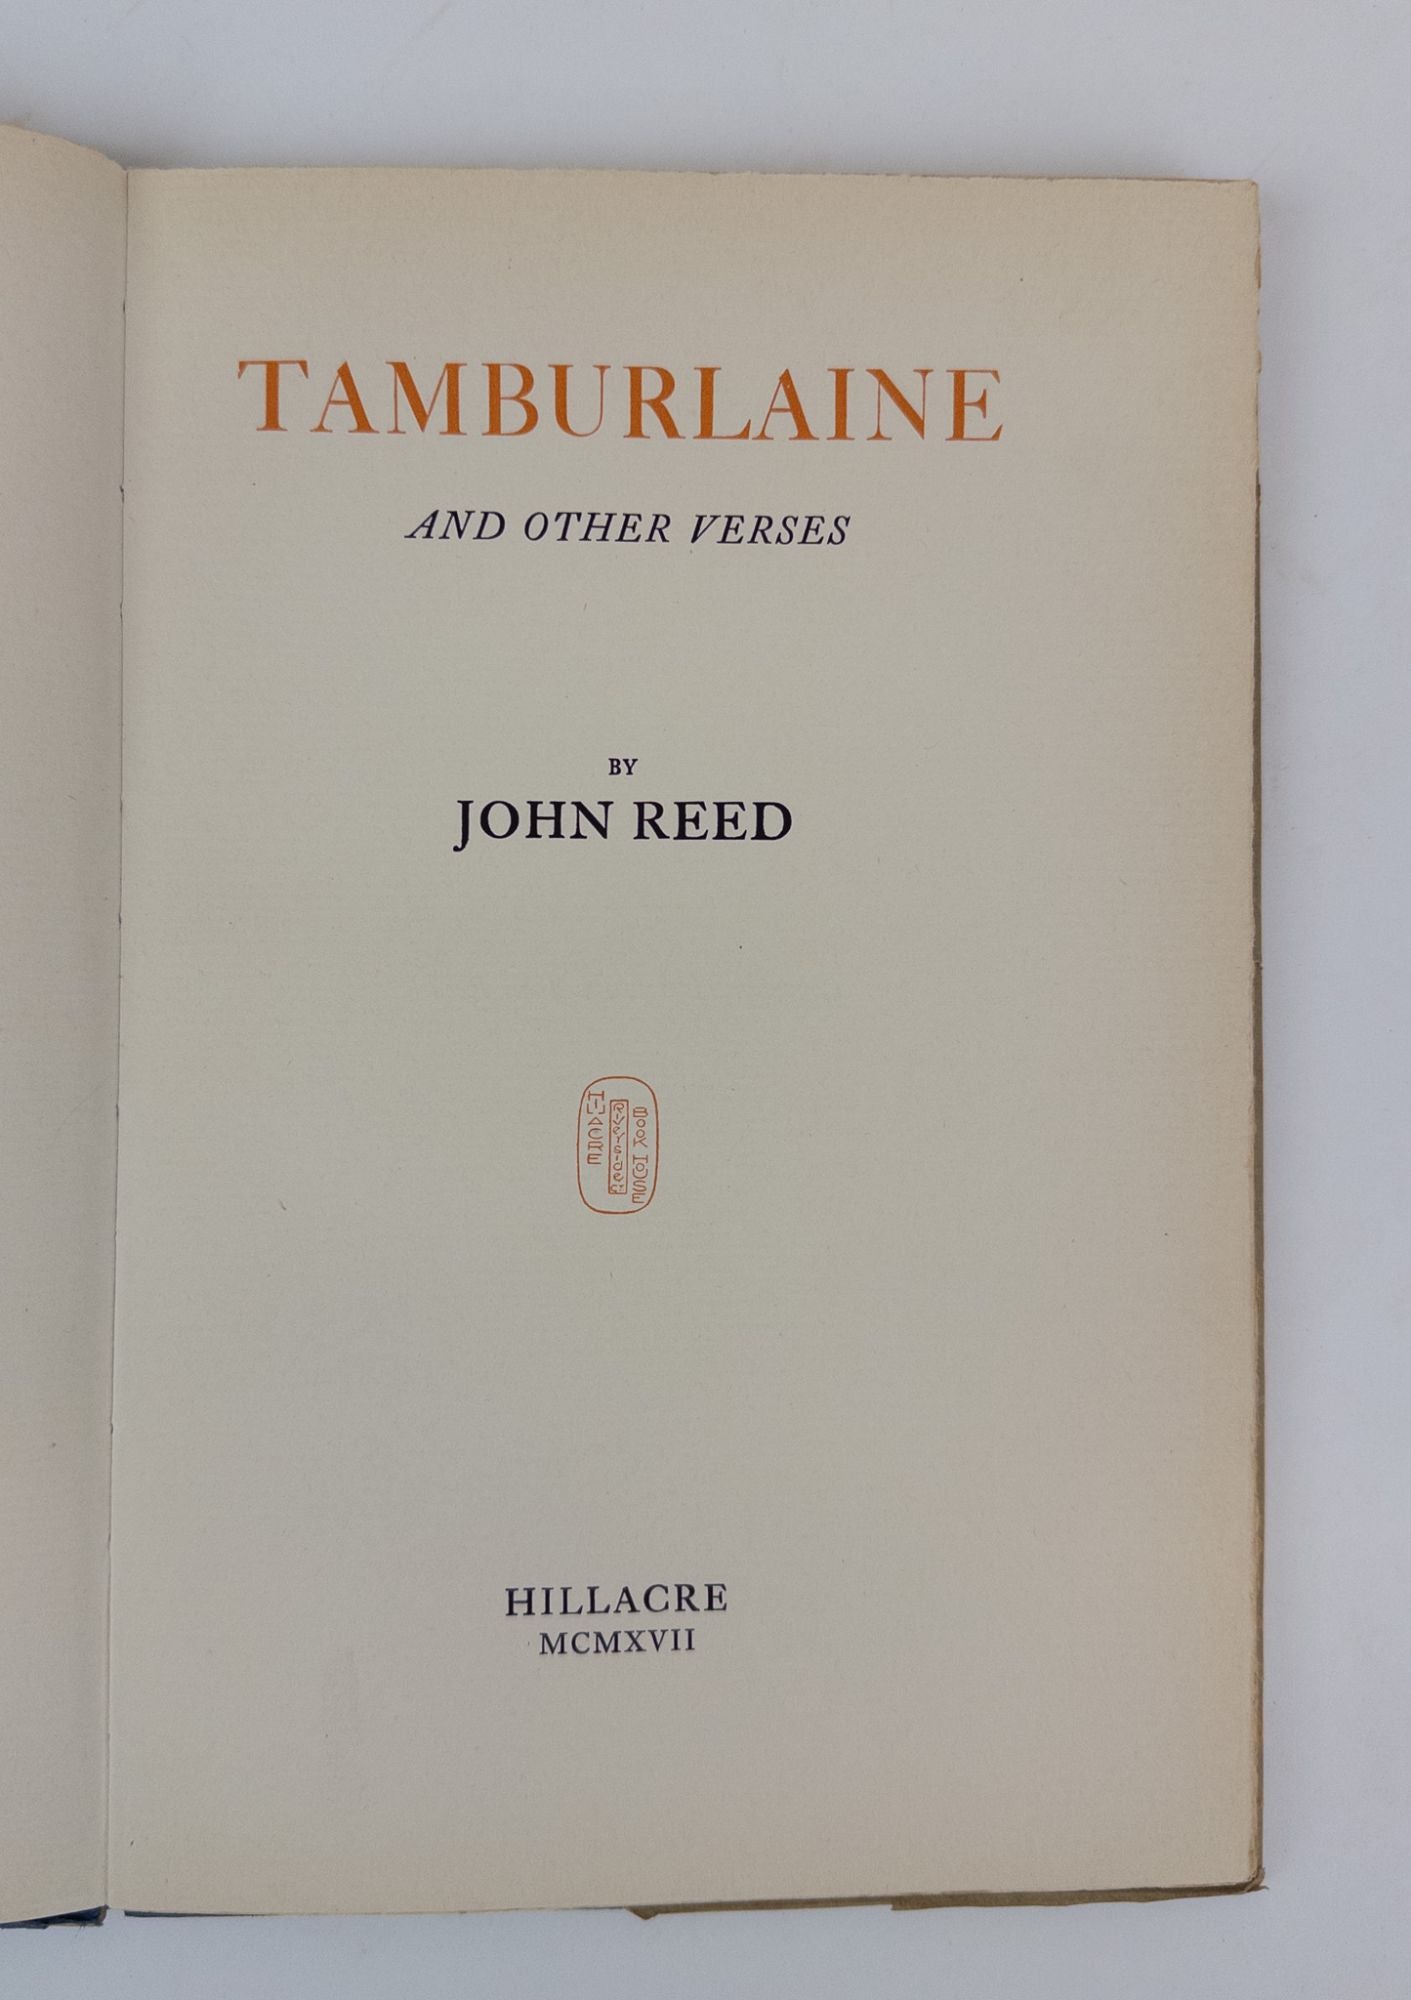 Product Image for TAMBURLAINE AND OTHER VERSES